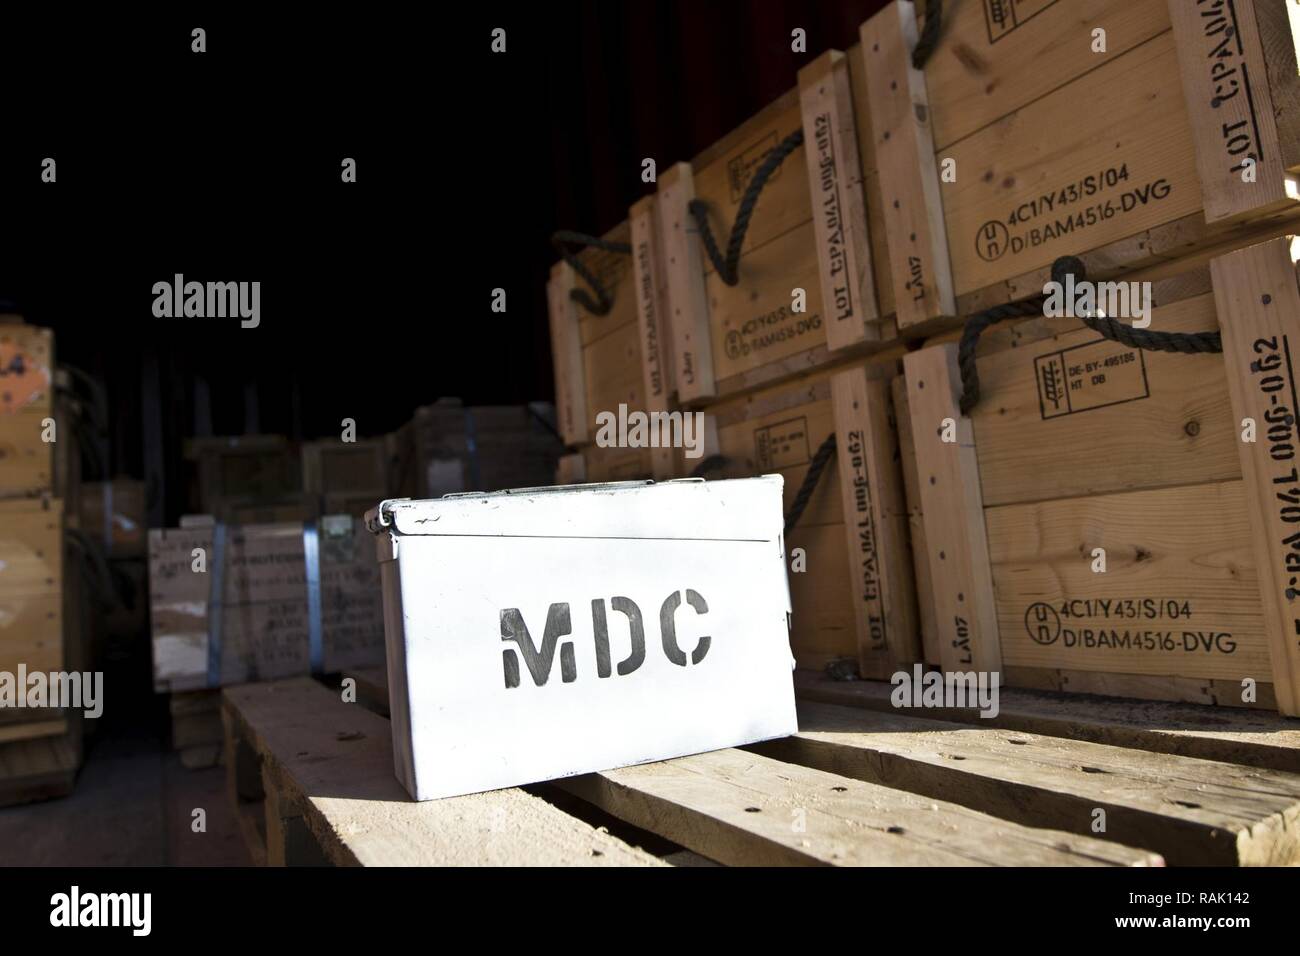 A Magazine Data Card (MDC) sits on an ammunition storage pallet during the 2017 Worldwide Ammunition Logistics and Explosives Safety Review in Camp Arifjan, Kuwait, on Feb. 7, 2017. The MDCs are a living document that counts the in and out of stock per ammo pallet. Stock Photo